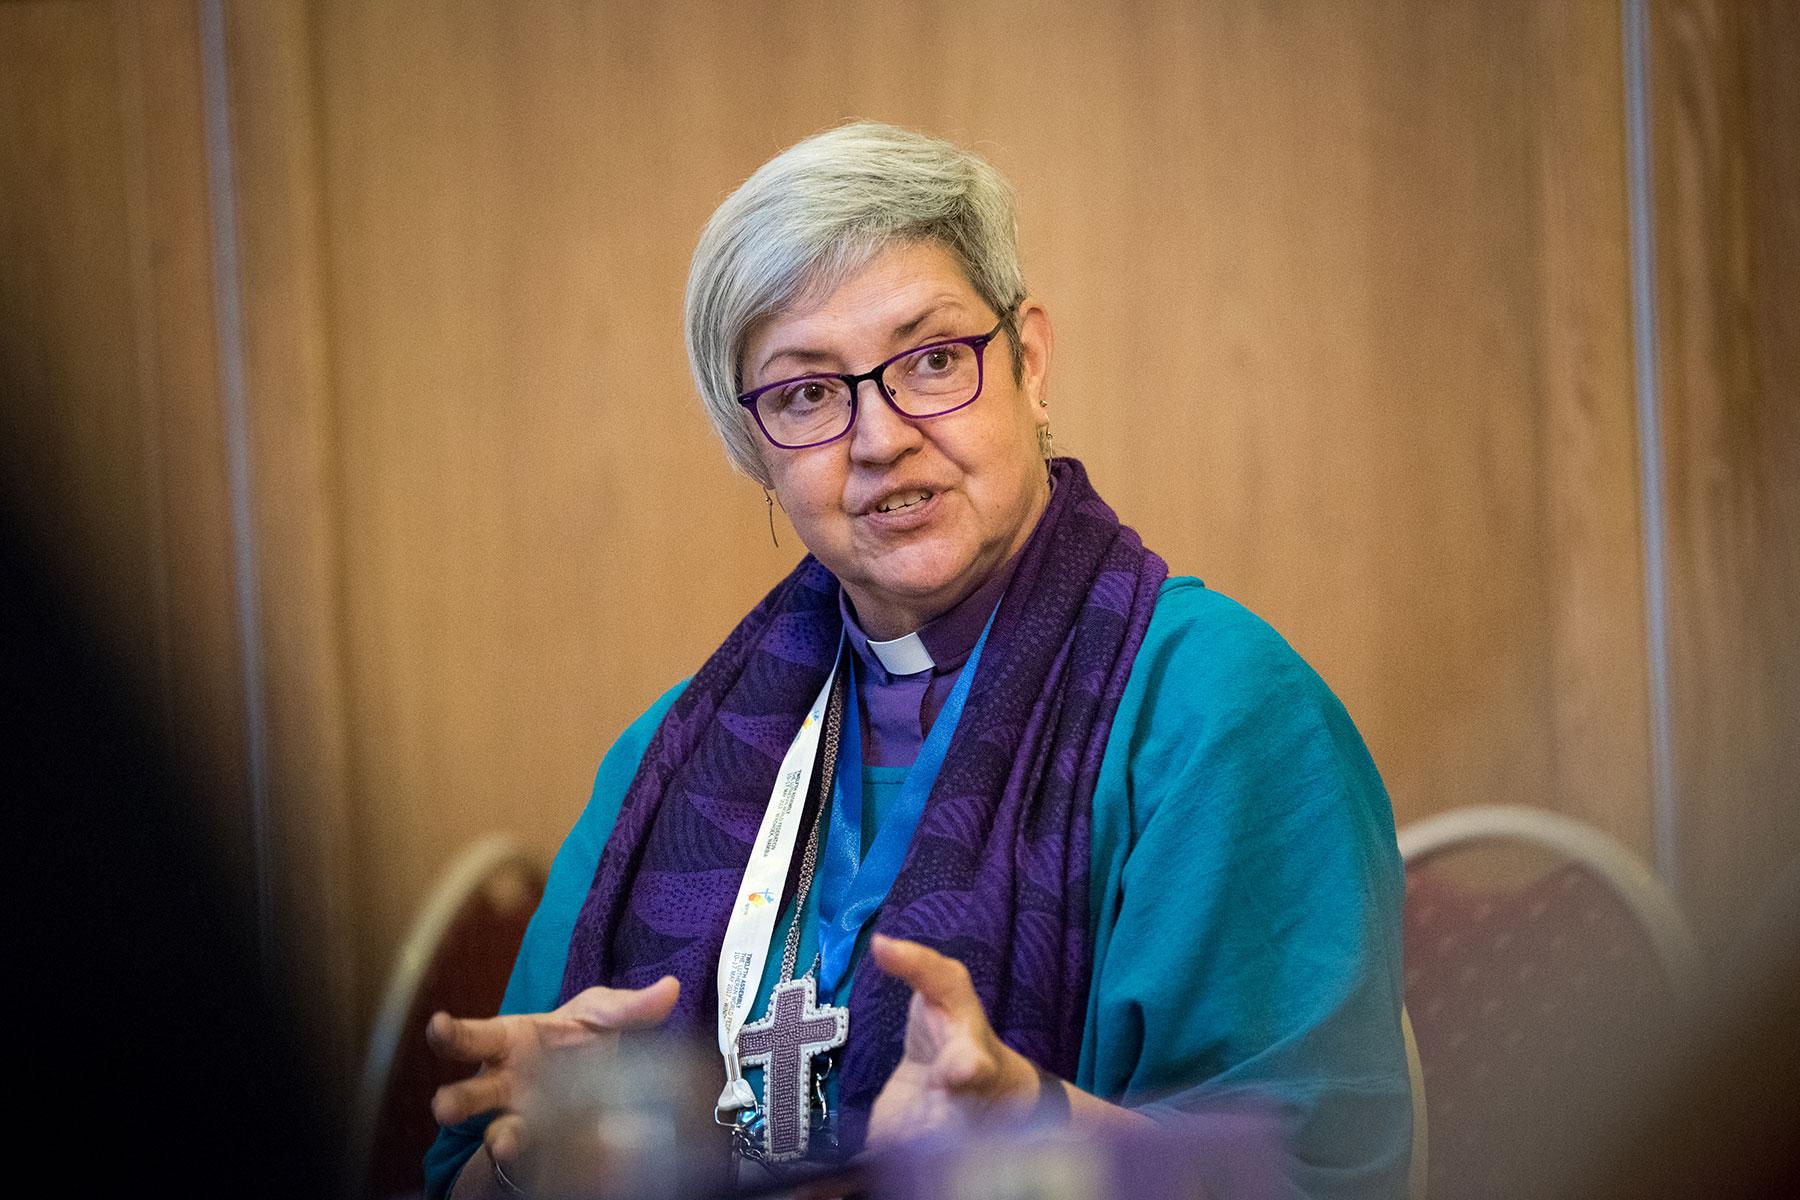 Evangelical Lutheran Church in Canada National Bishop Susan Johnson pictured in 2017 at the LWF Twelfth Assembly in Windhoek, Namibia. Photo: LWF/Albin Hillert